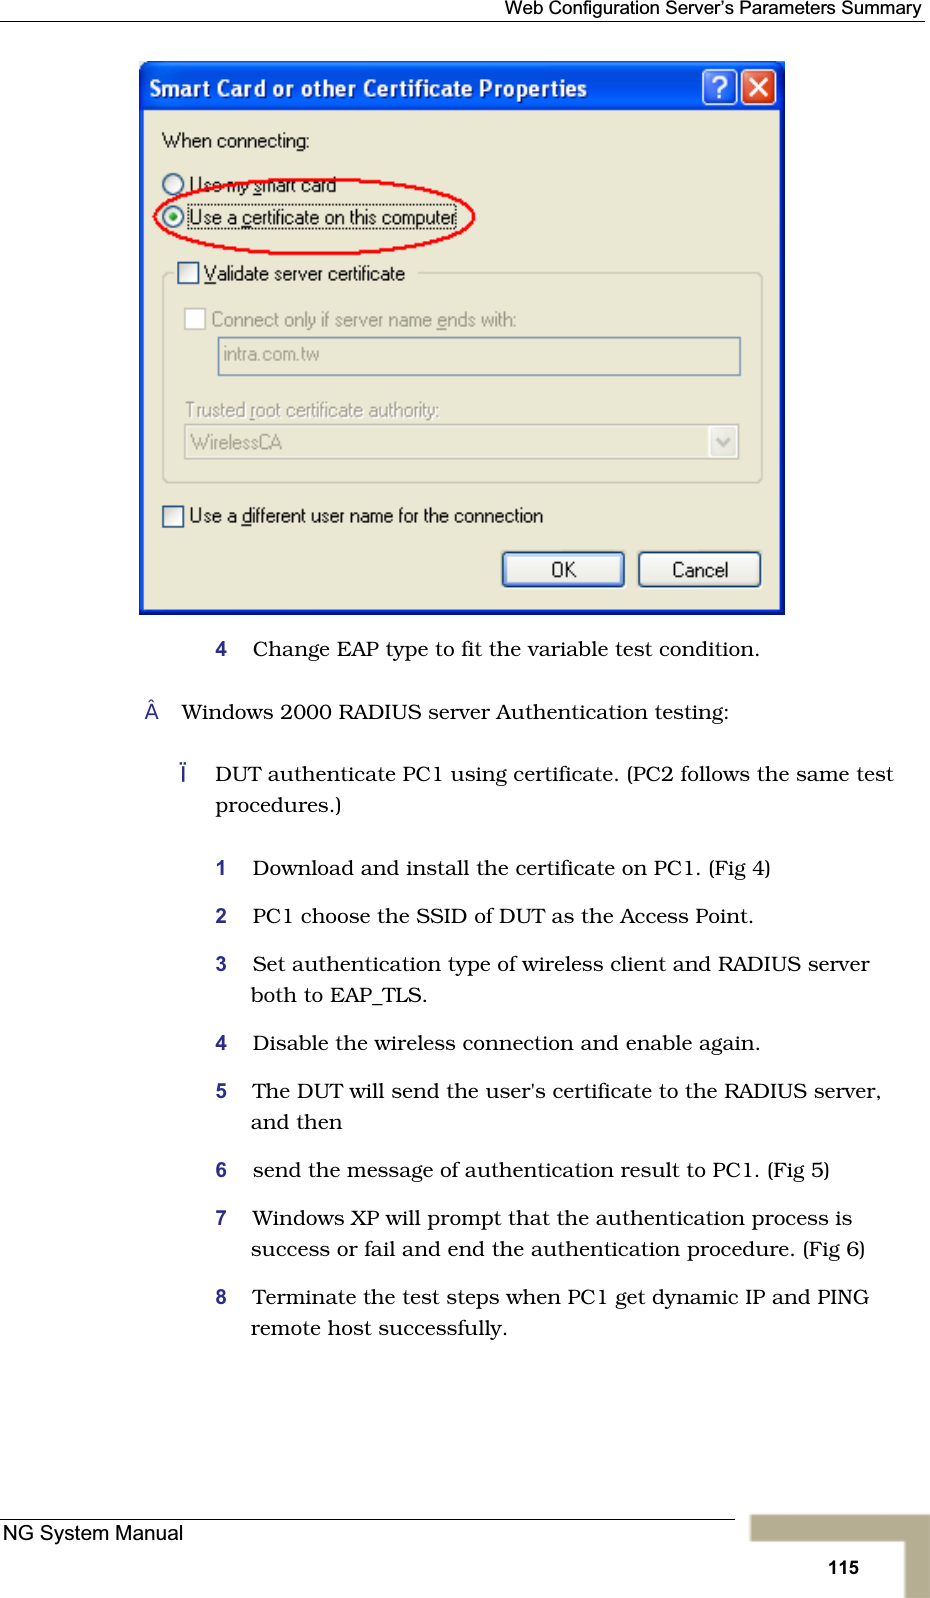 Web Configuration Server’s Parameters Summary4Change EAP type to fit the variable test condition.Windows 2000 RADIUS server Authentication testing:DUT authenticate PC1 using certificate. (PC2 follows the same test procedures.)1Download and install the certificate on PC1. (Fig 4) 2PC1 choose the SSID of DUT as the Access Point.3Set authentication type of wireless client and RADIUS serverboth to EAP_TLS.4Disable the wireless connection and enable again.5The DUT will send the user&apos;s certificate to the RADIUS server,and then6send the message of authentication result to PC1. (Fig 5) 7Windows XP will prompt that the authentication process is success or fail and end the authentication procedure. (Fig 6)8Terminate the test steps when PC1 get dynamic IP and PINGremote host successfully.NG System Manual115